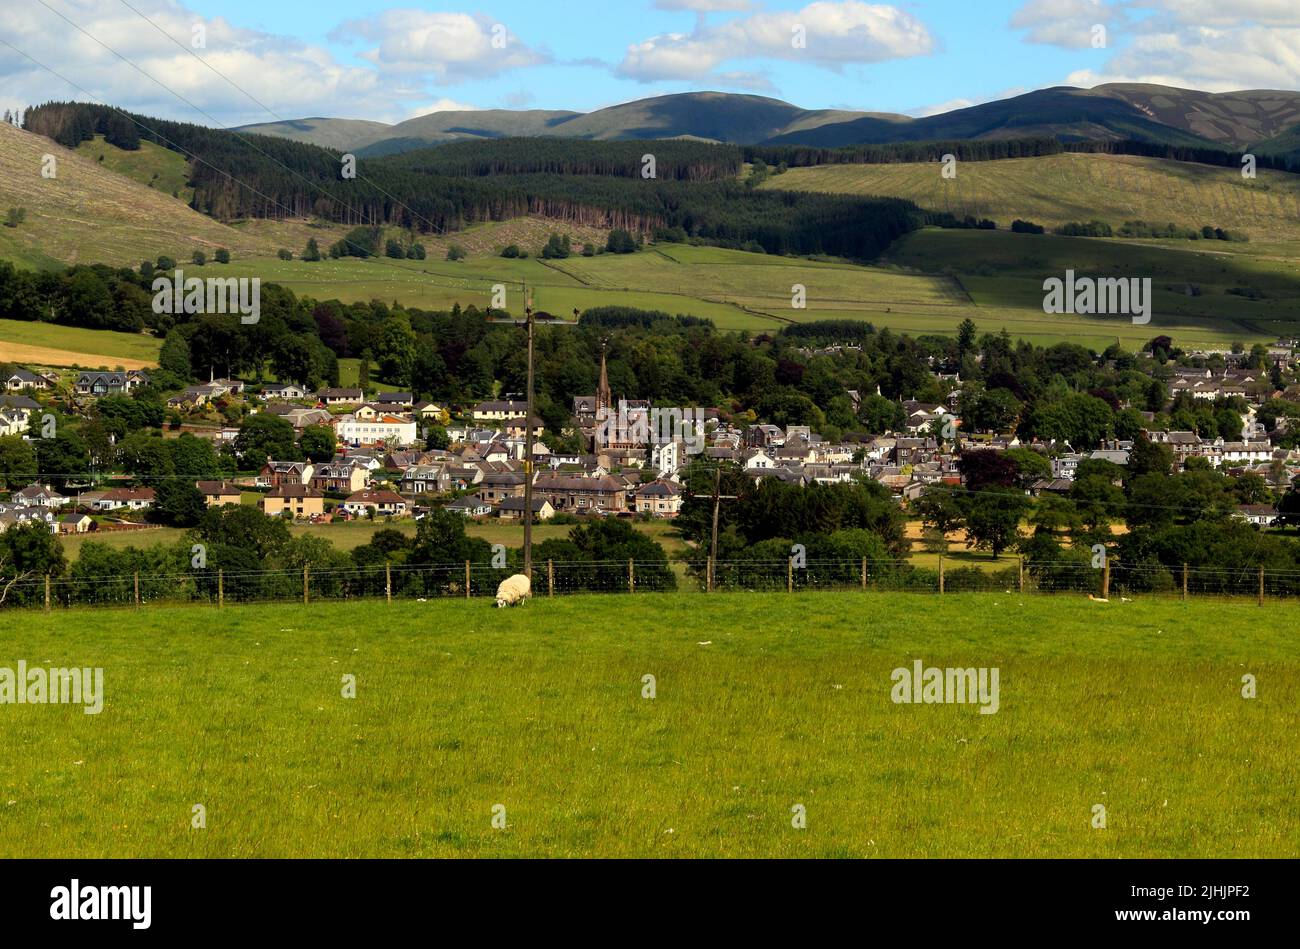 Panoramic view looking down on the town of Moffat, Dumfriesshire, Dumfries & Galloway, Scotland, UK Stock Photo